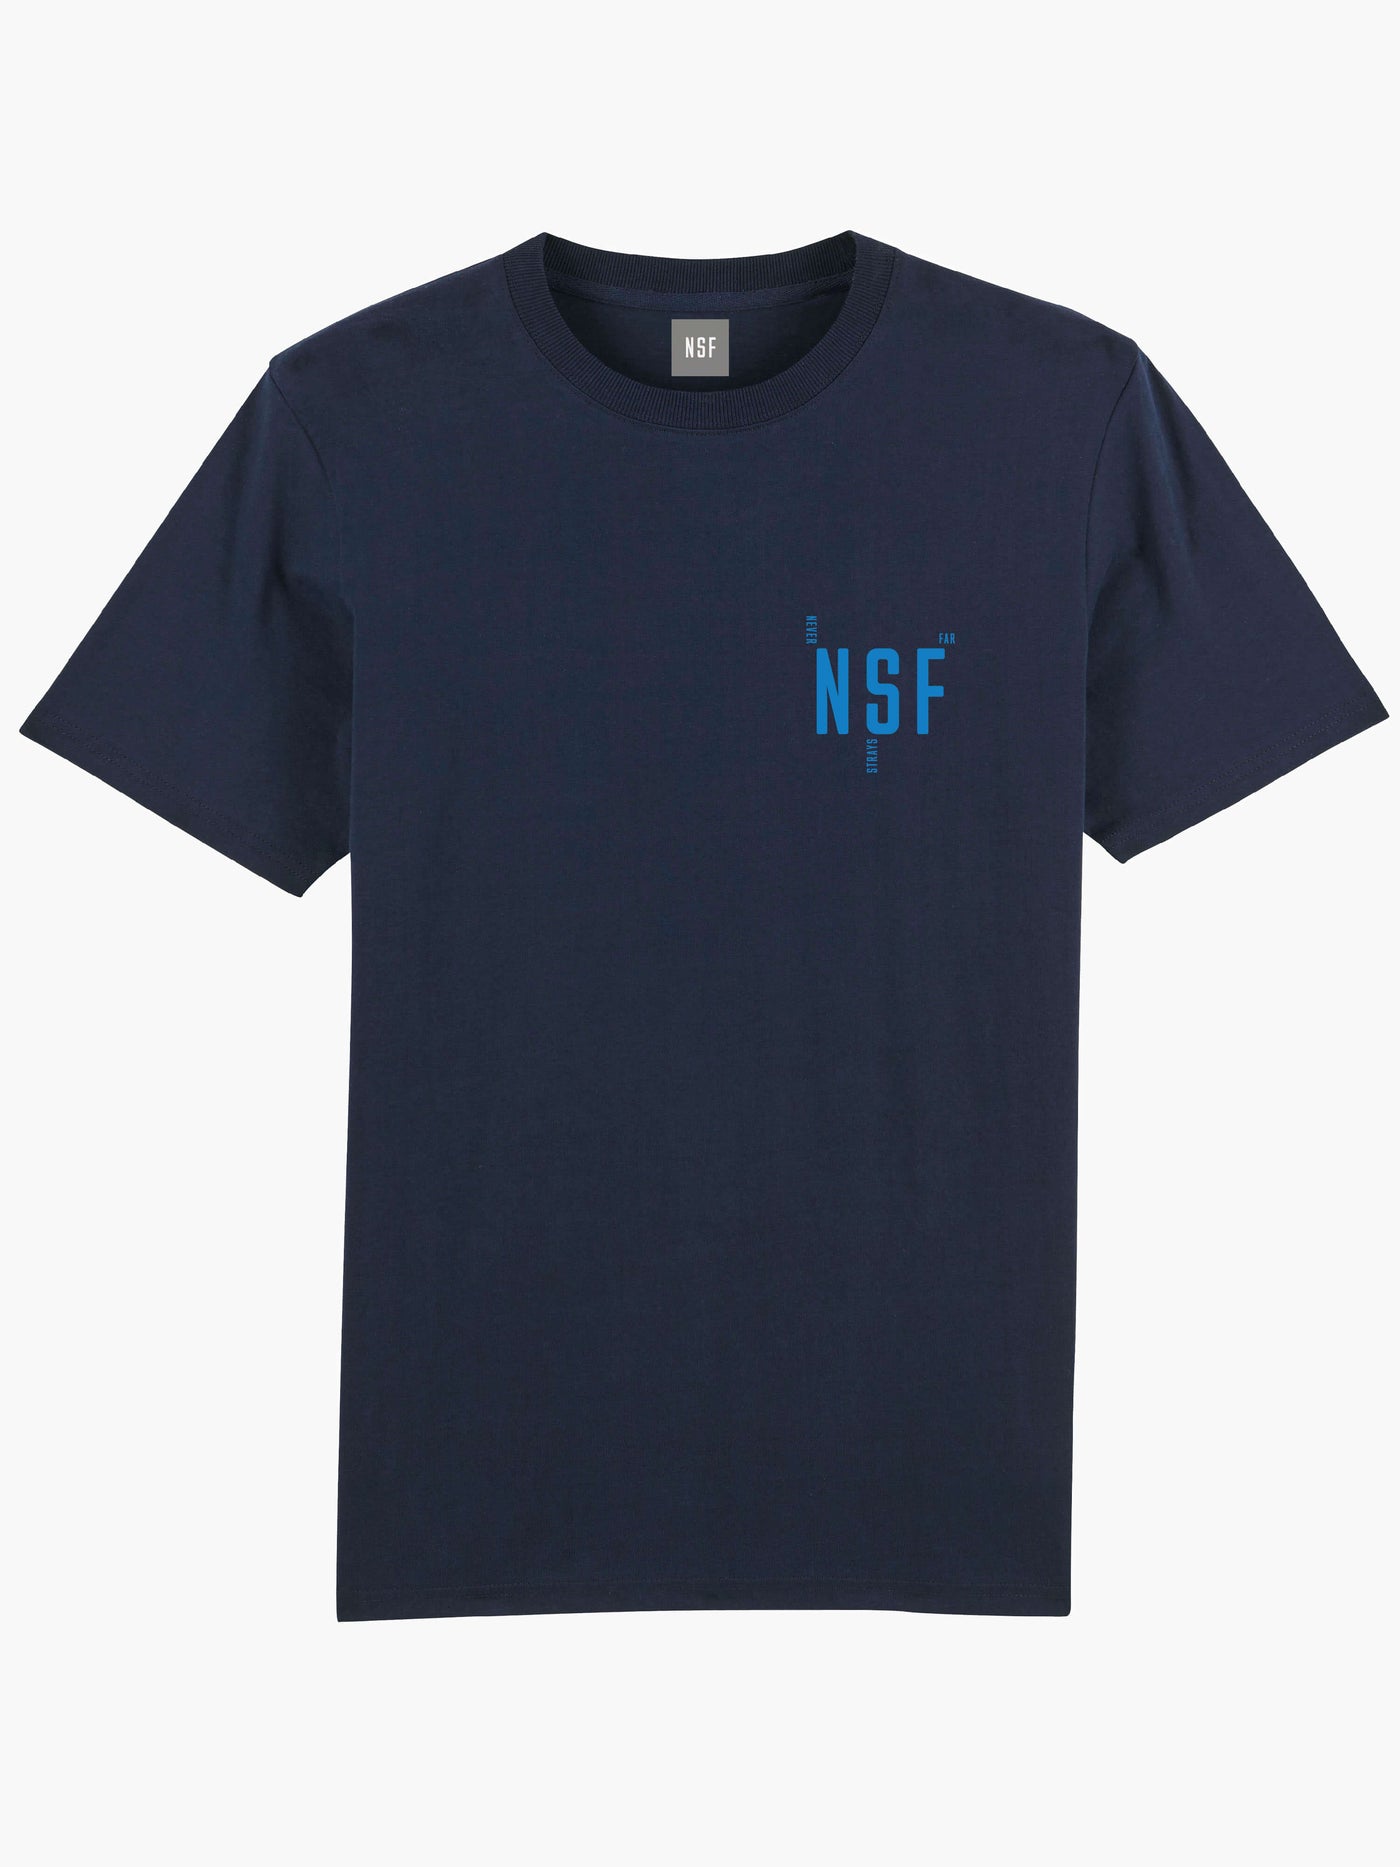 Never Strays Far T-shirt in Navy blue #color_navy-blue